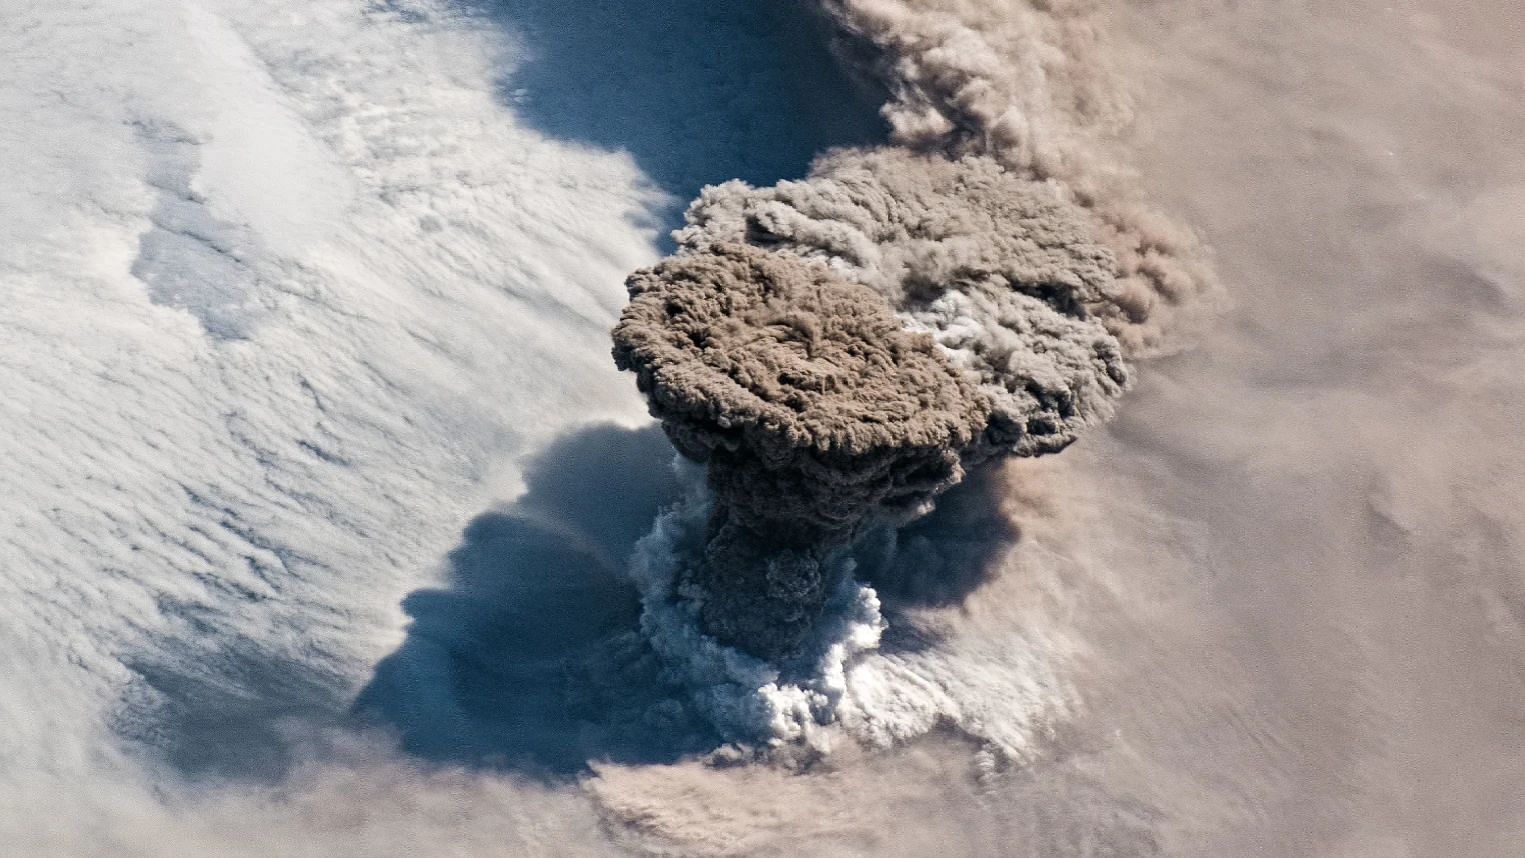 The Raikoke Volcano, which erupted after ninety-five years of remaining dormant, captured from space by the International Space Station.